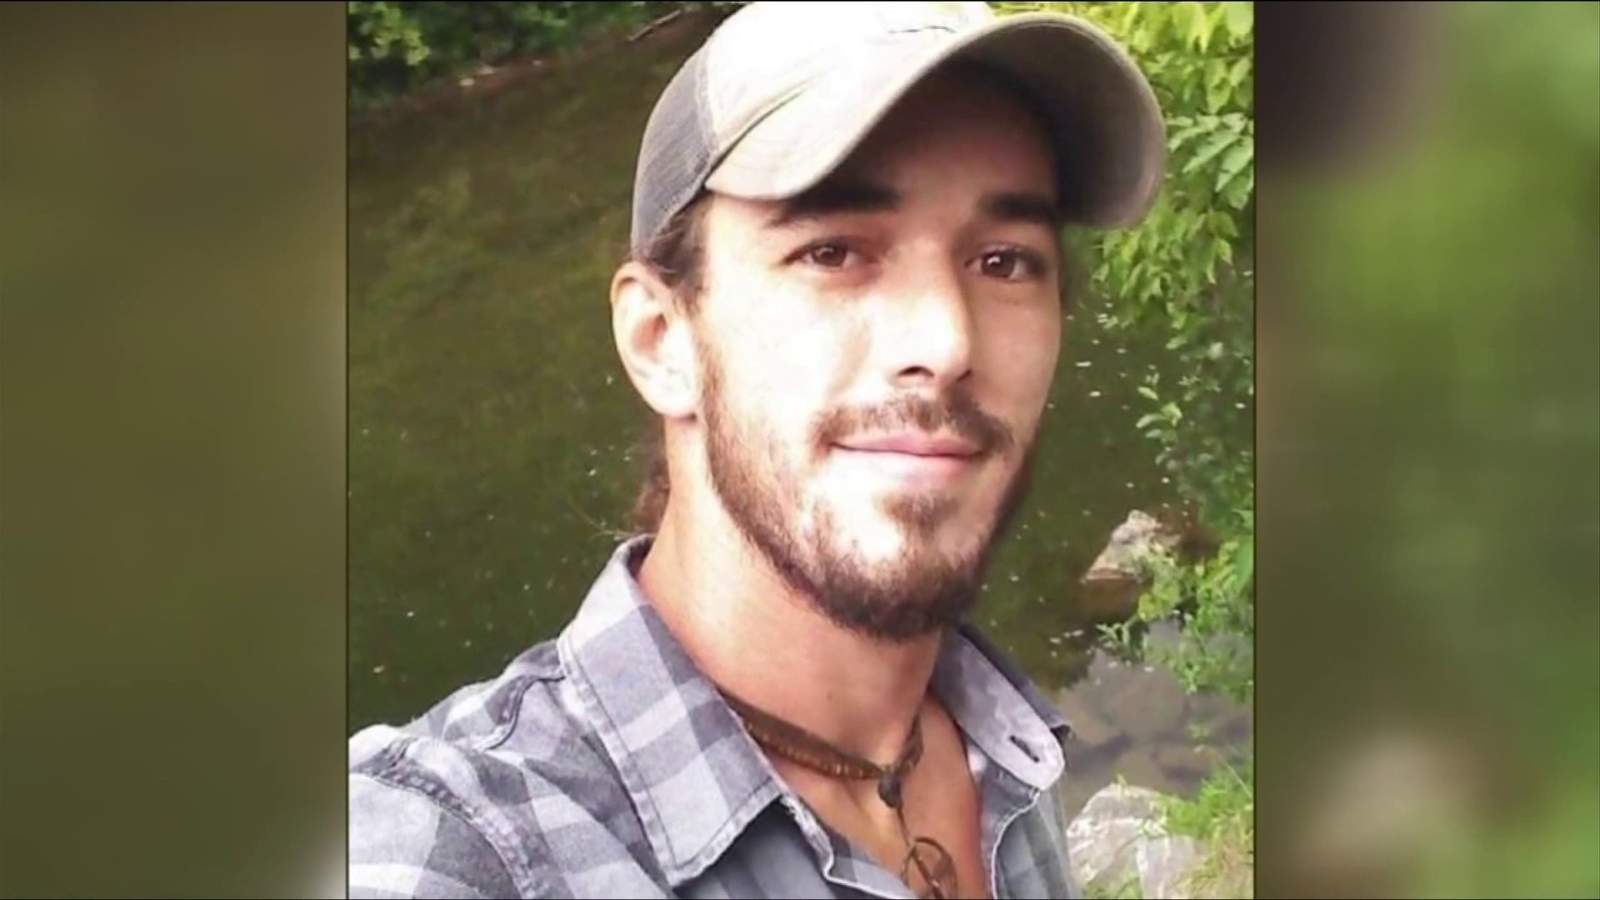 Remains of missing Buena Vista man found after nearly a year of searching